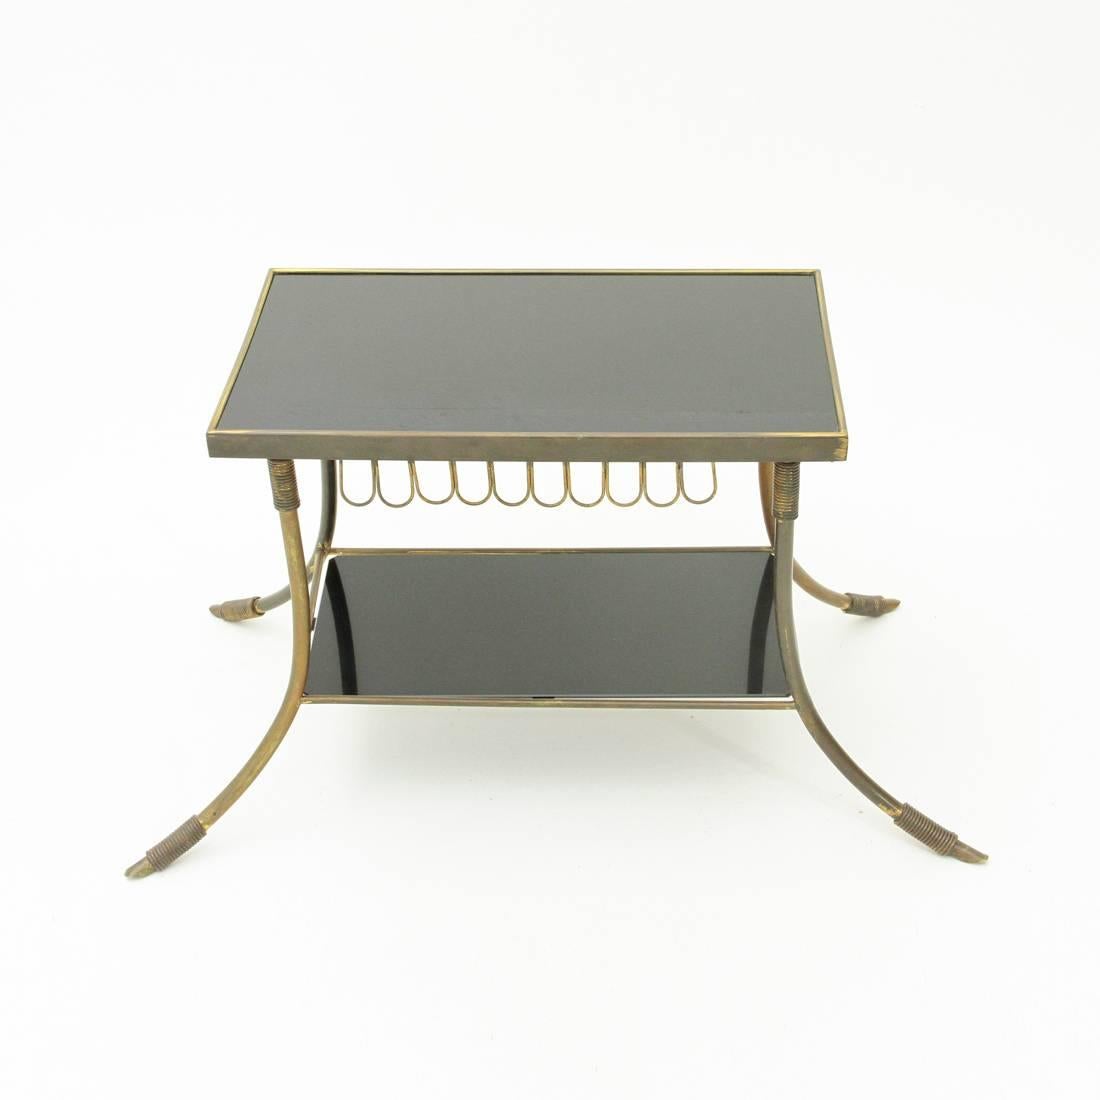 Mid-20th Century Italian Brass and Glass Coffee Table, 1950s